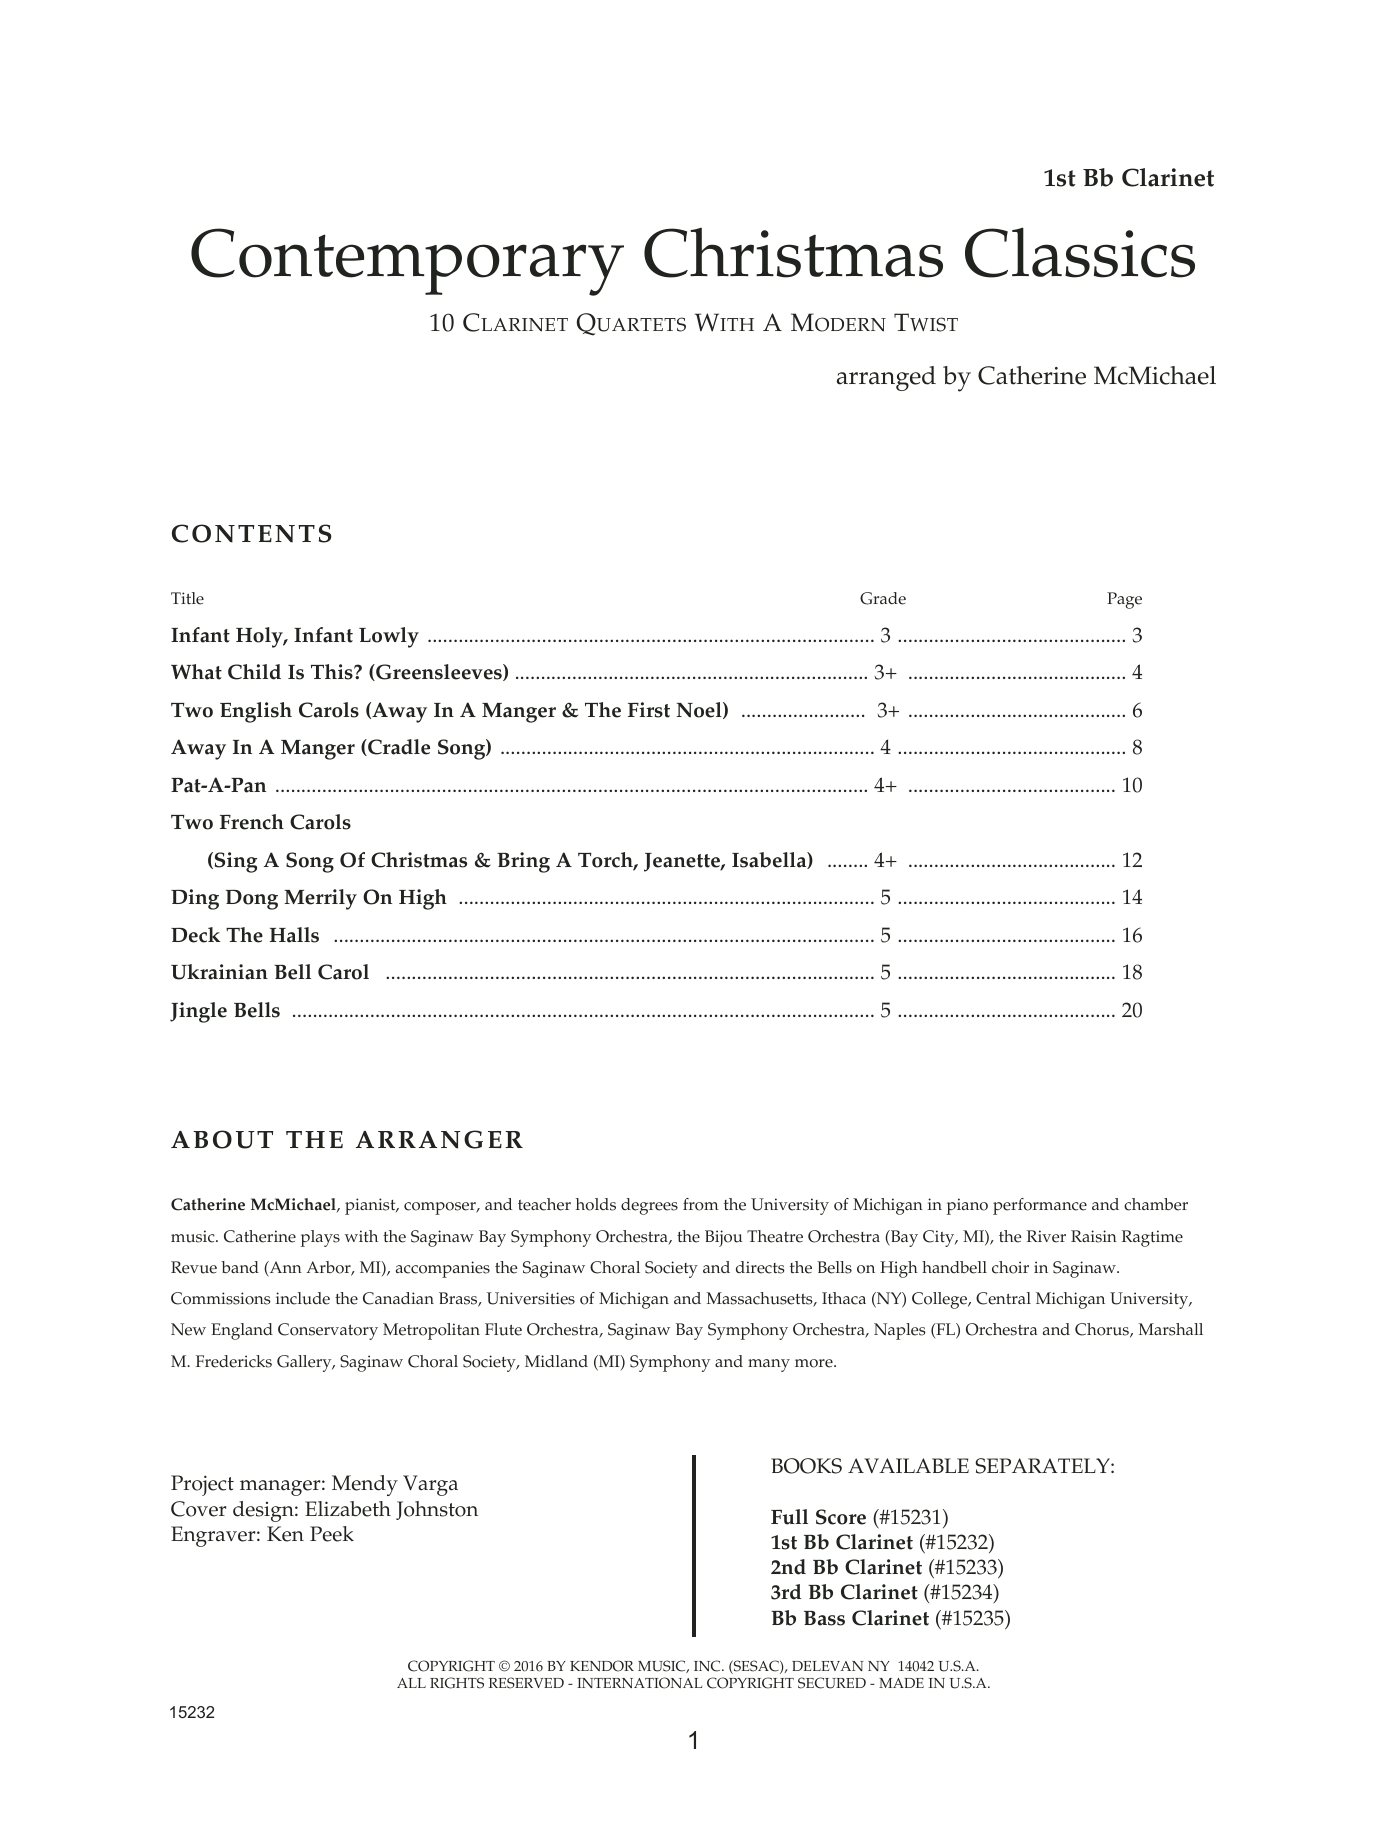 Download Catherine McMichael Contemporary Christmas Classics - 1st B Sheet Music